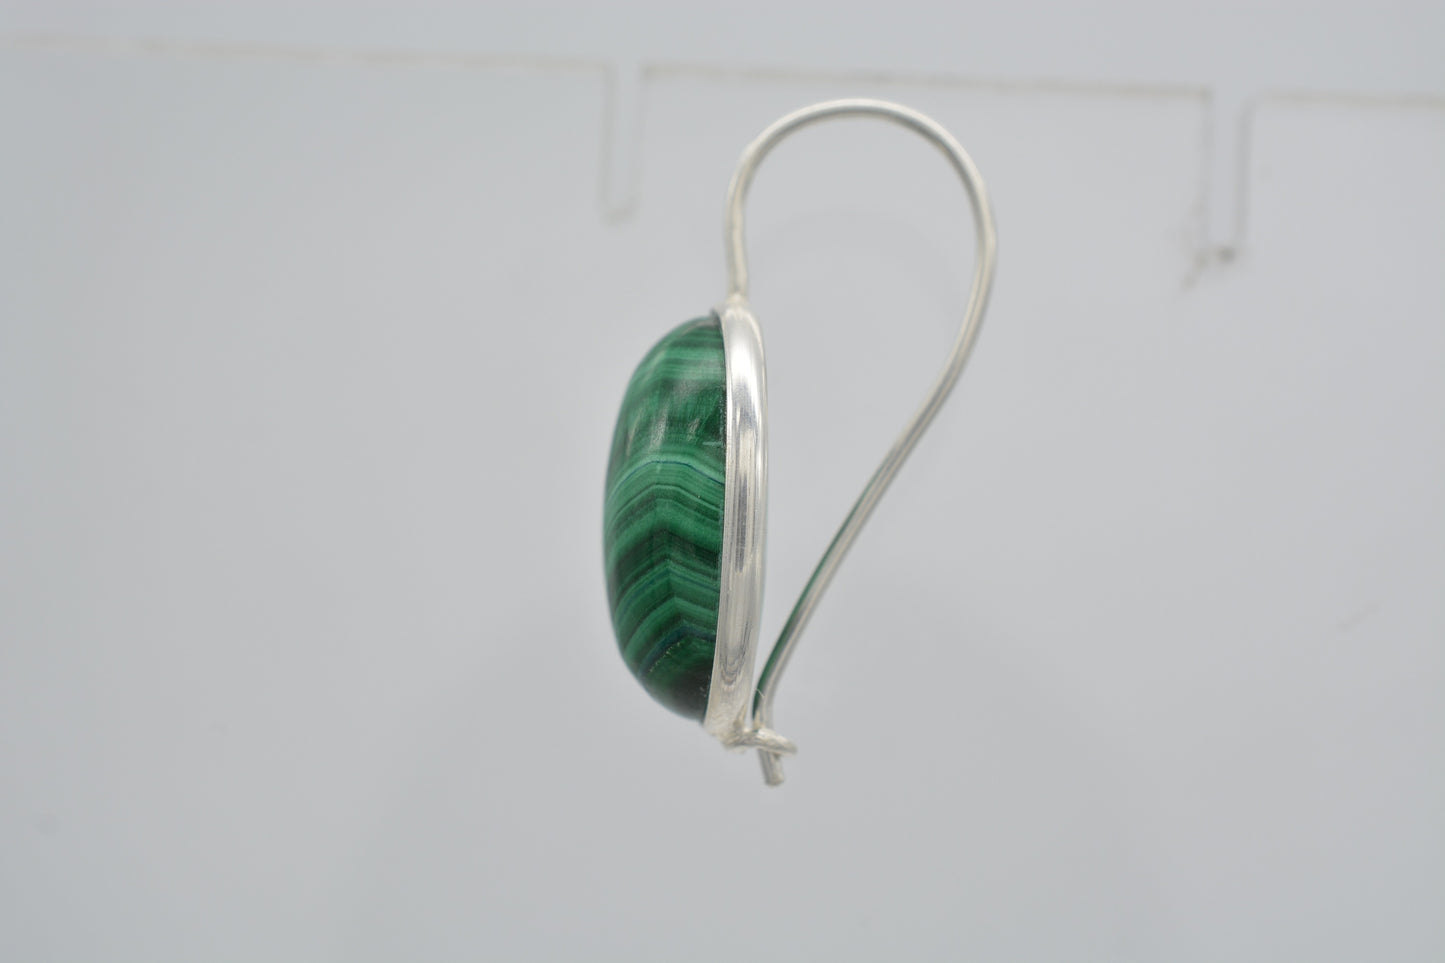 Natural Malachite Wire Earrings In 925 Sterling Silver Plated Cabochon Gemstone Jewelry At Wholesale Price